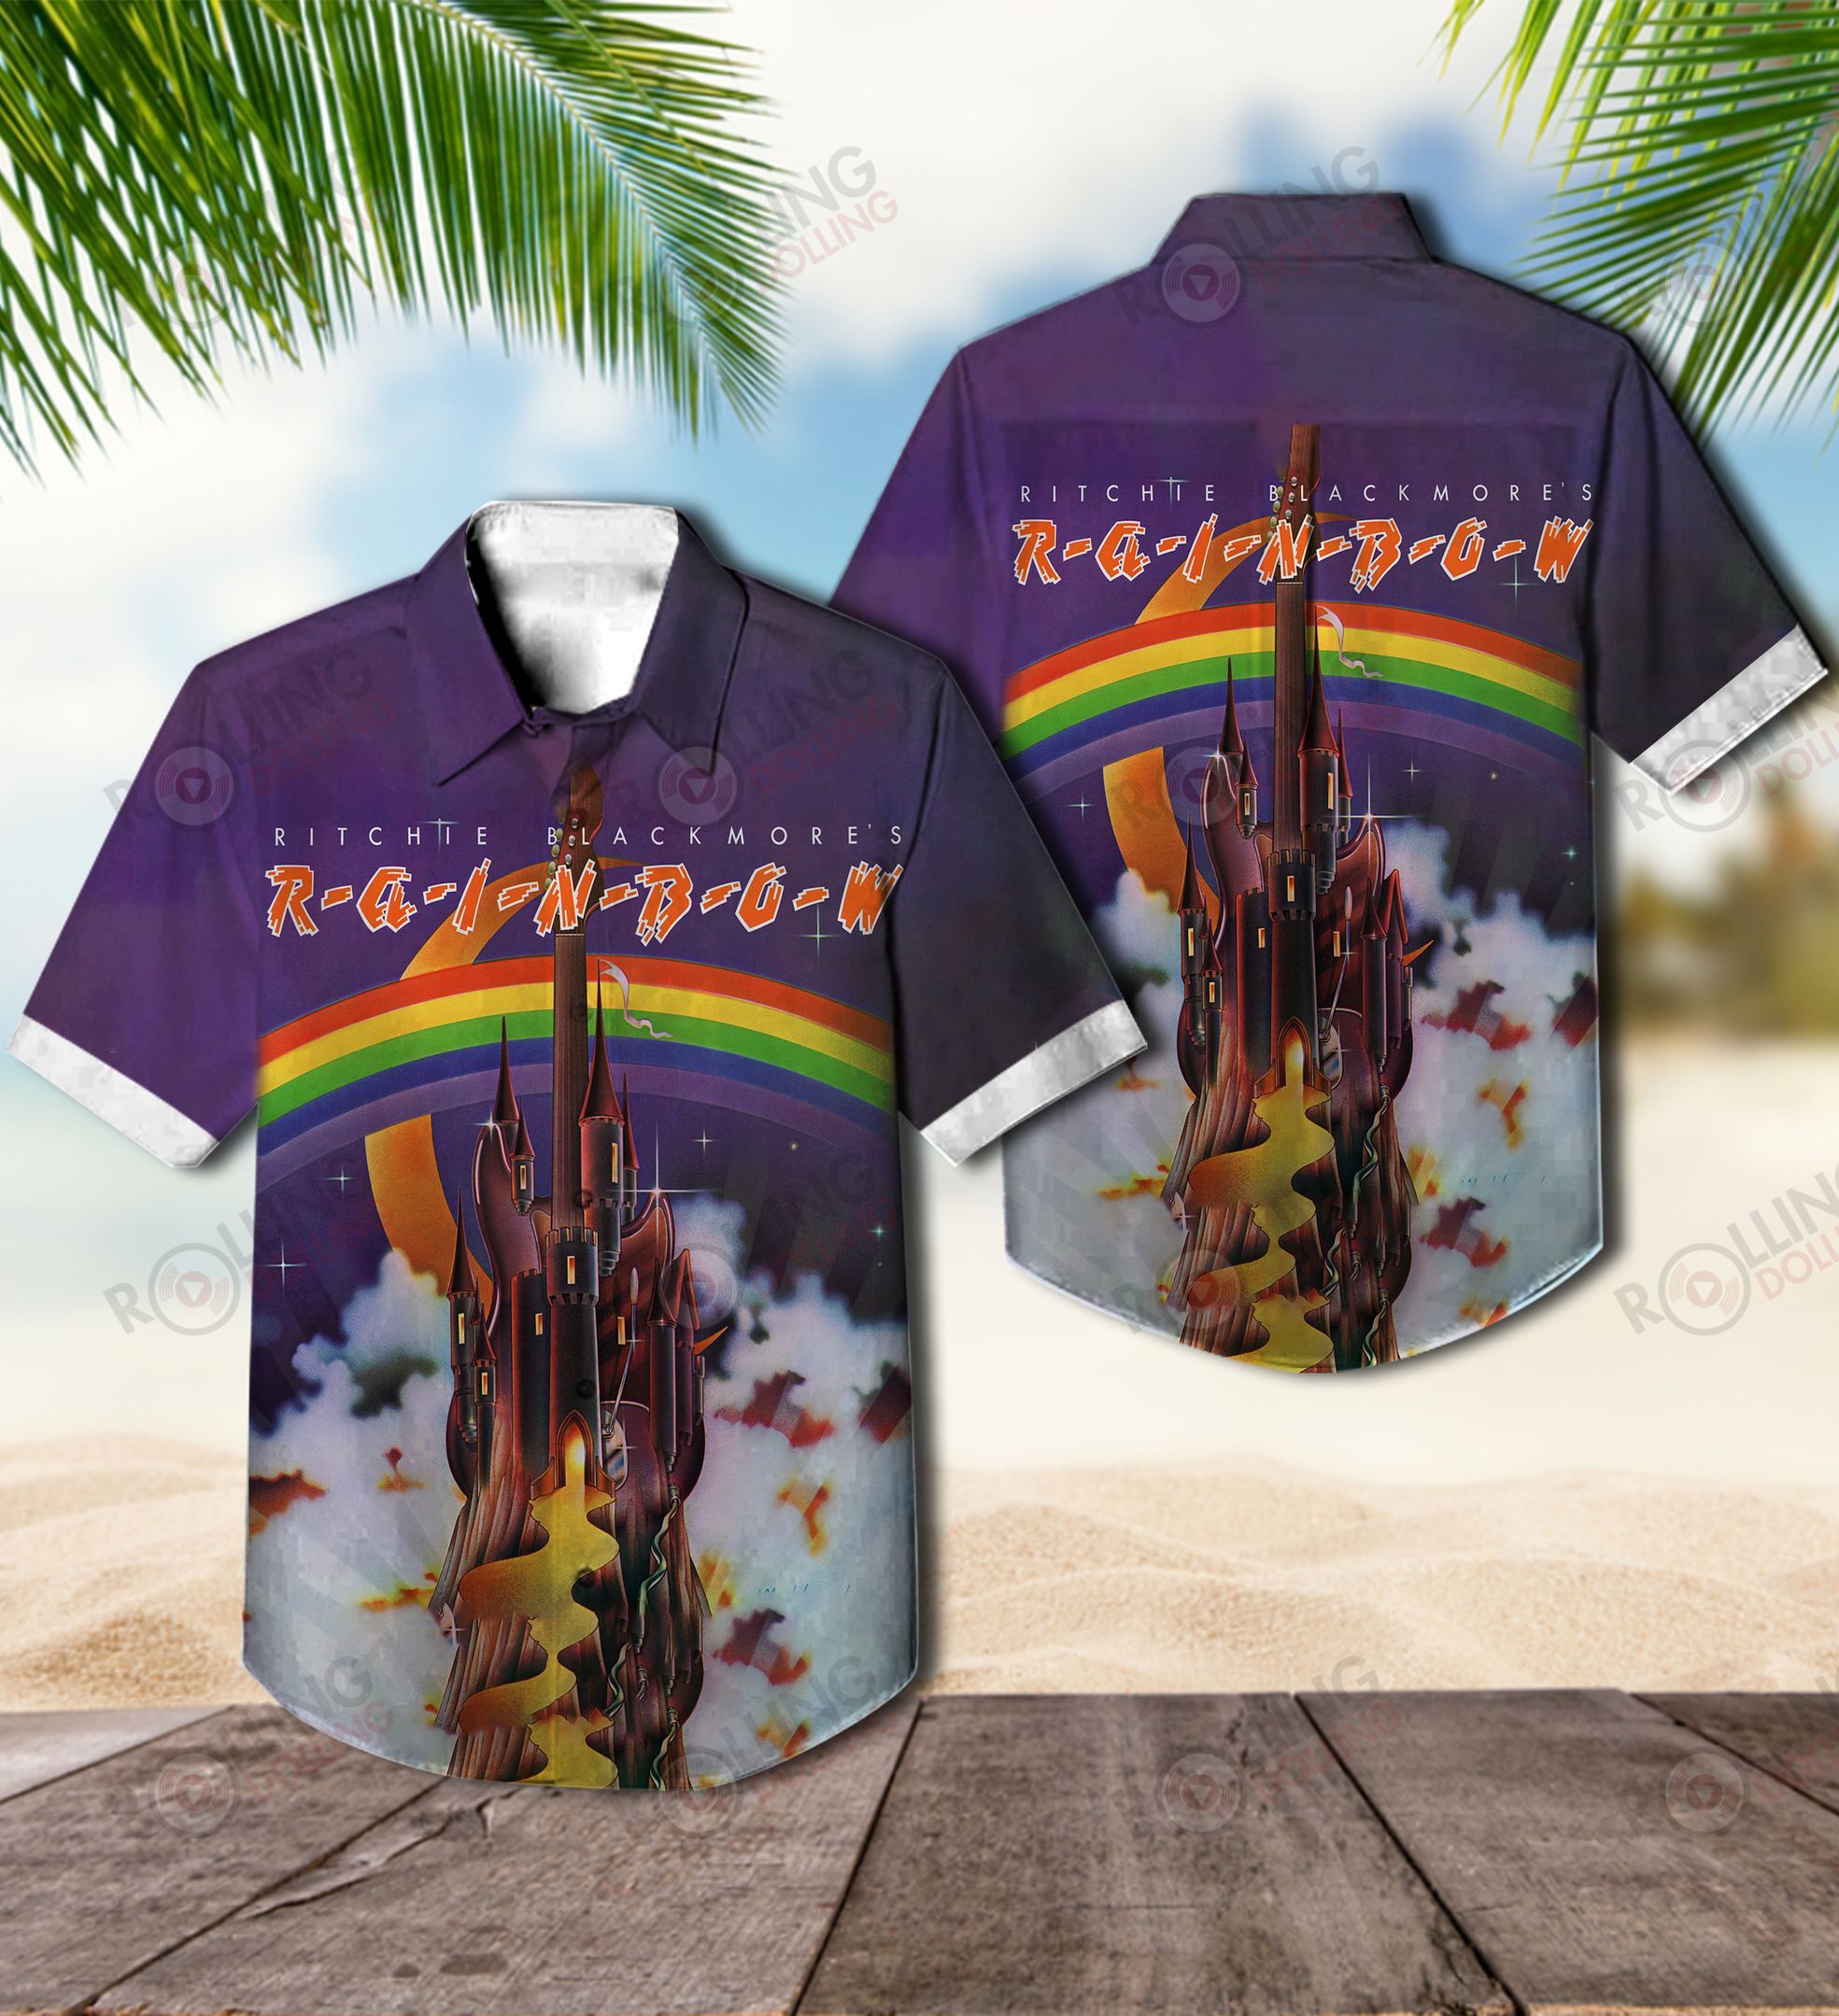 For summer, consider wearing This Amazing Hawaiian Shirt shirt in our store 125